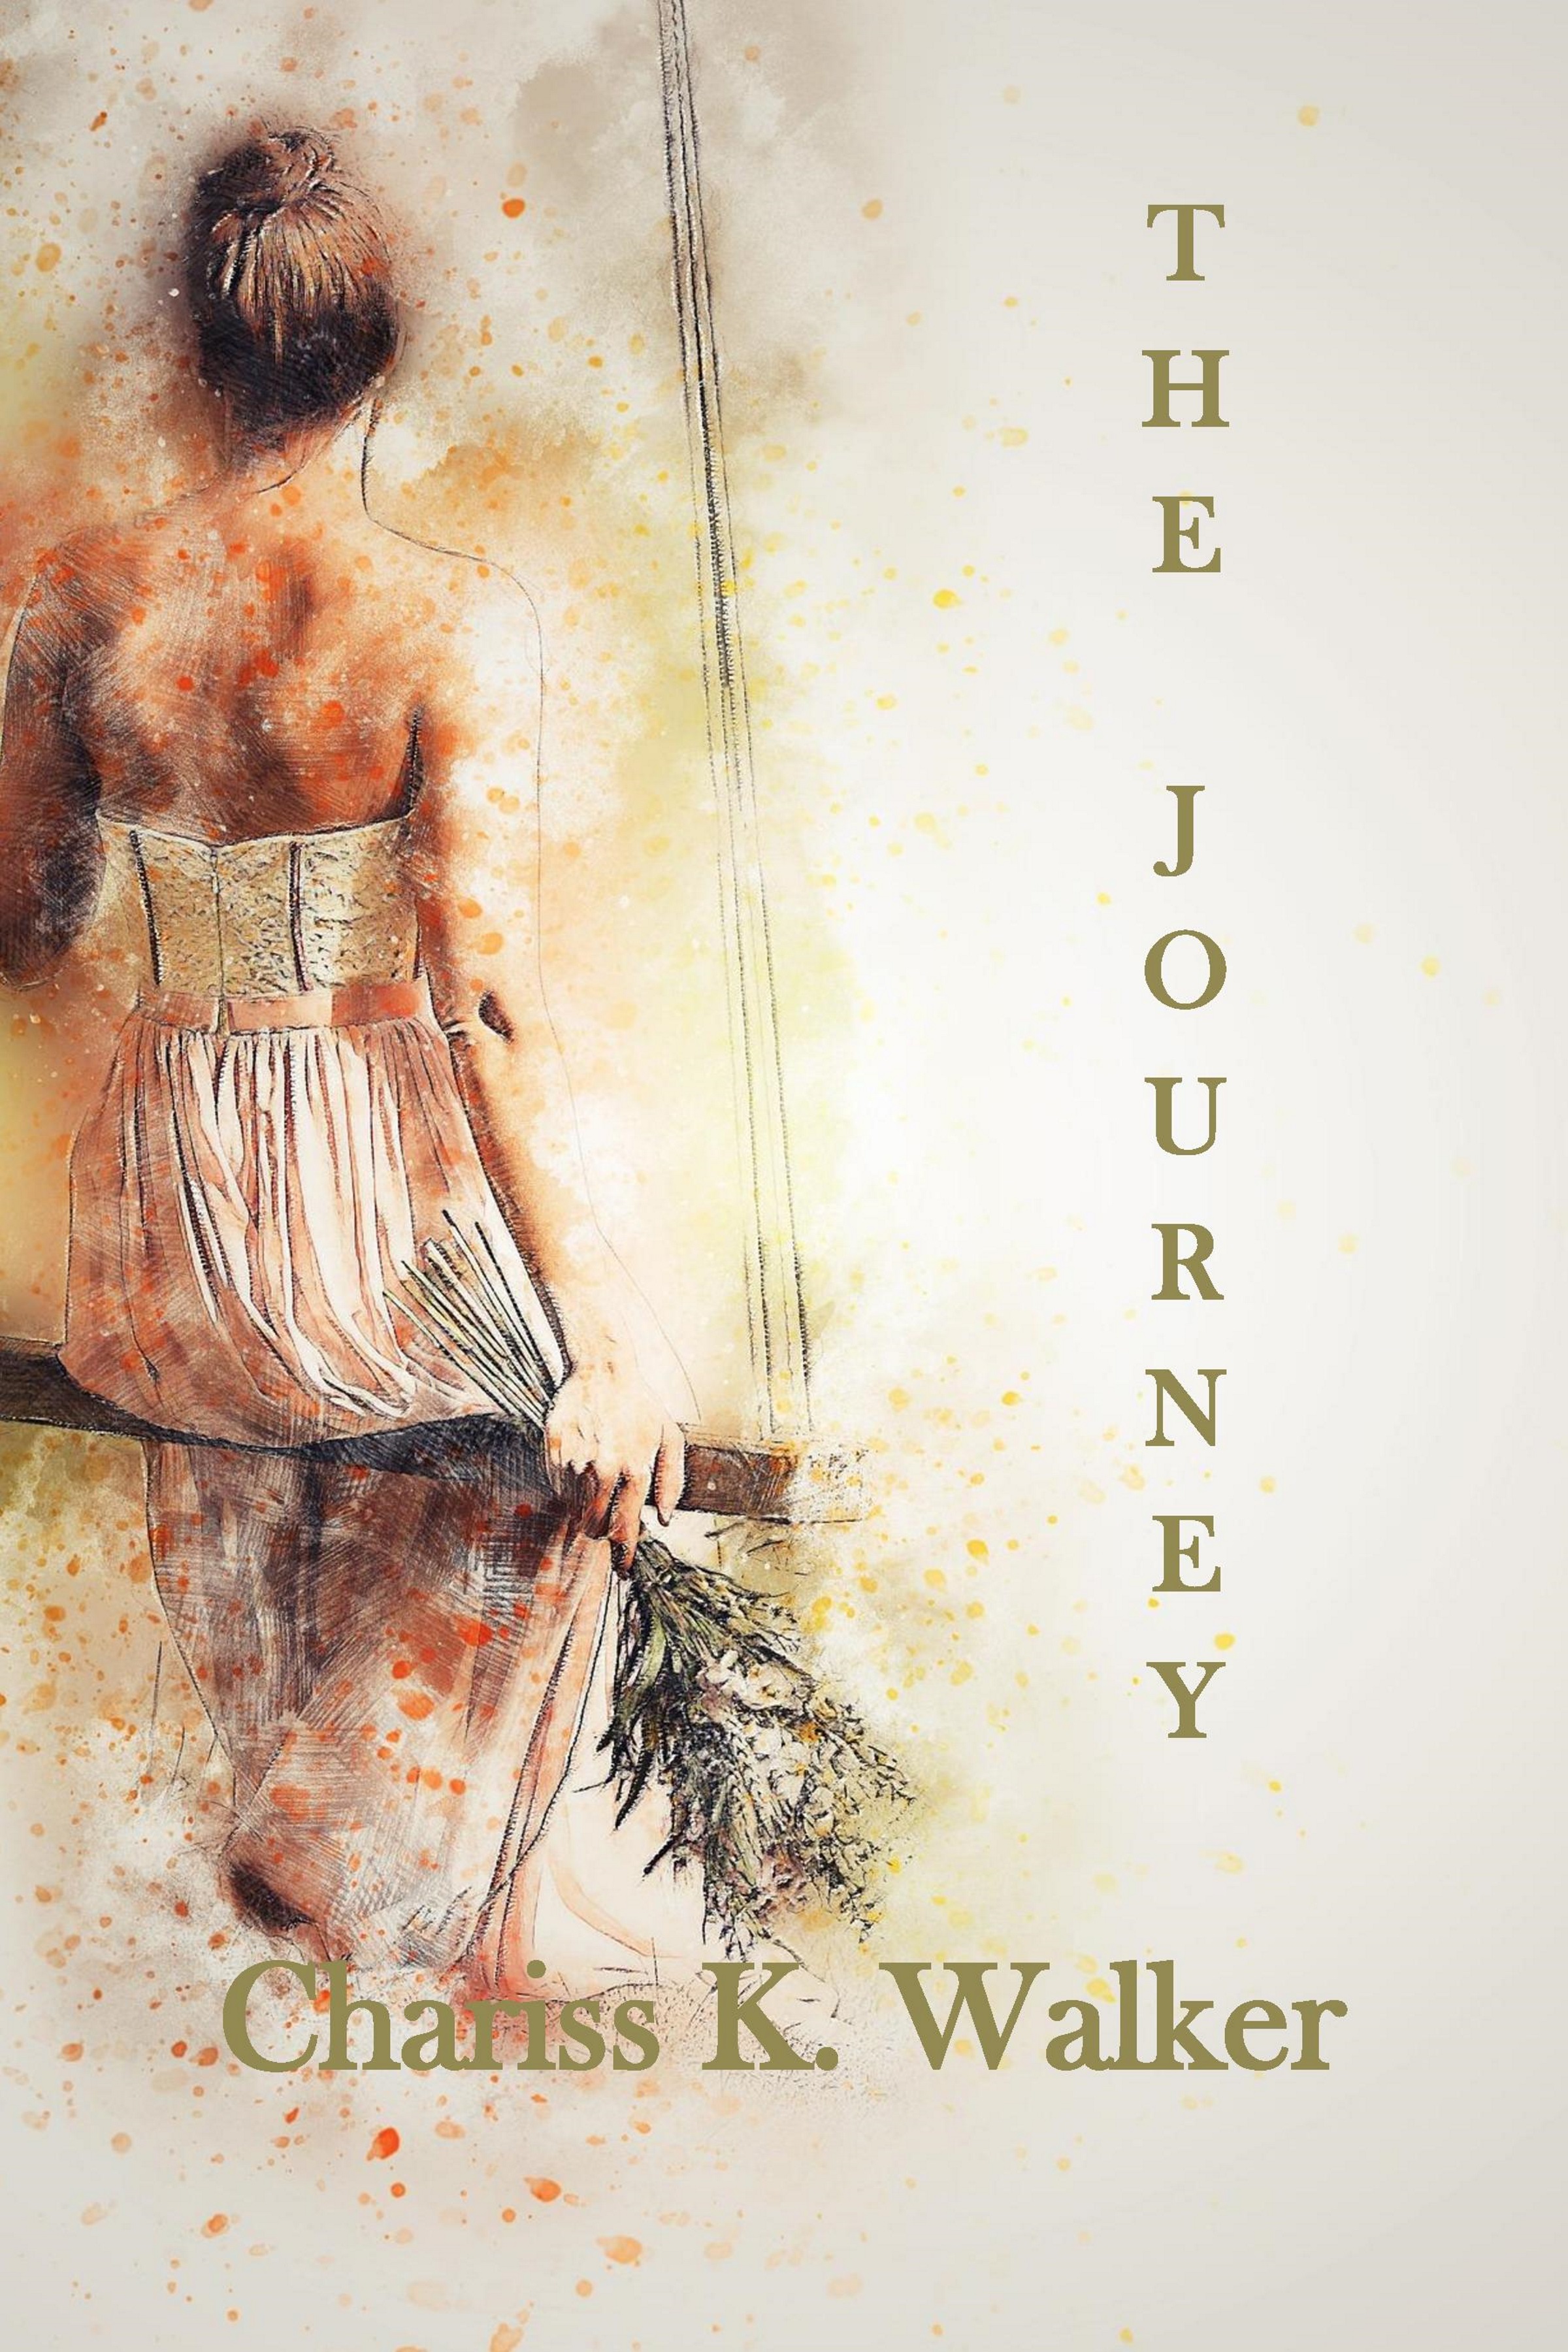 FREE: The Journey by Chariss K. Walker